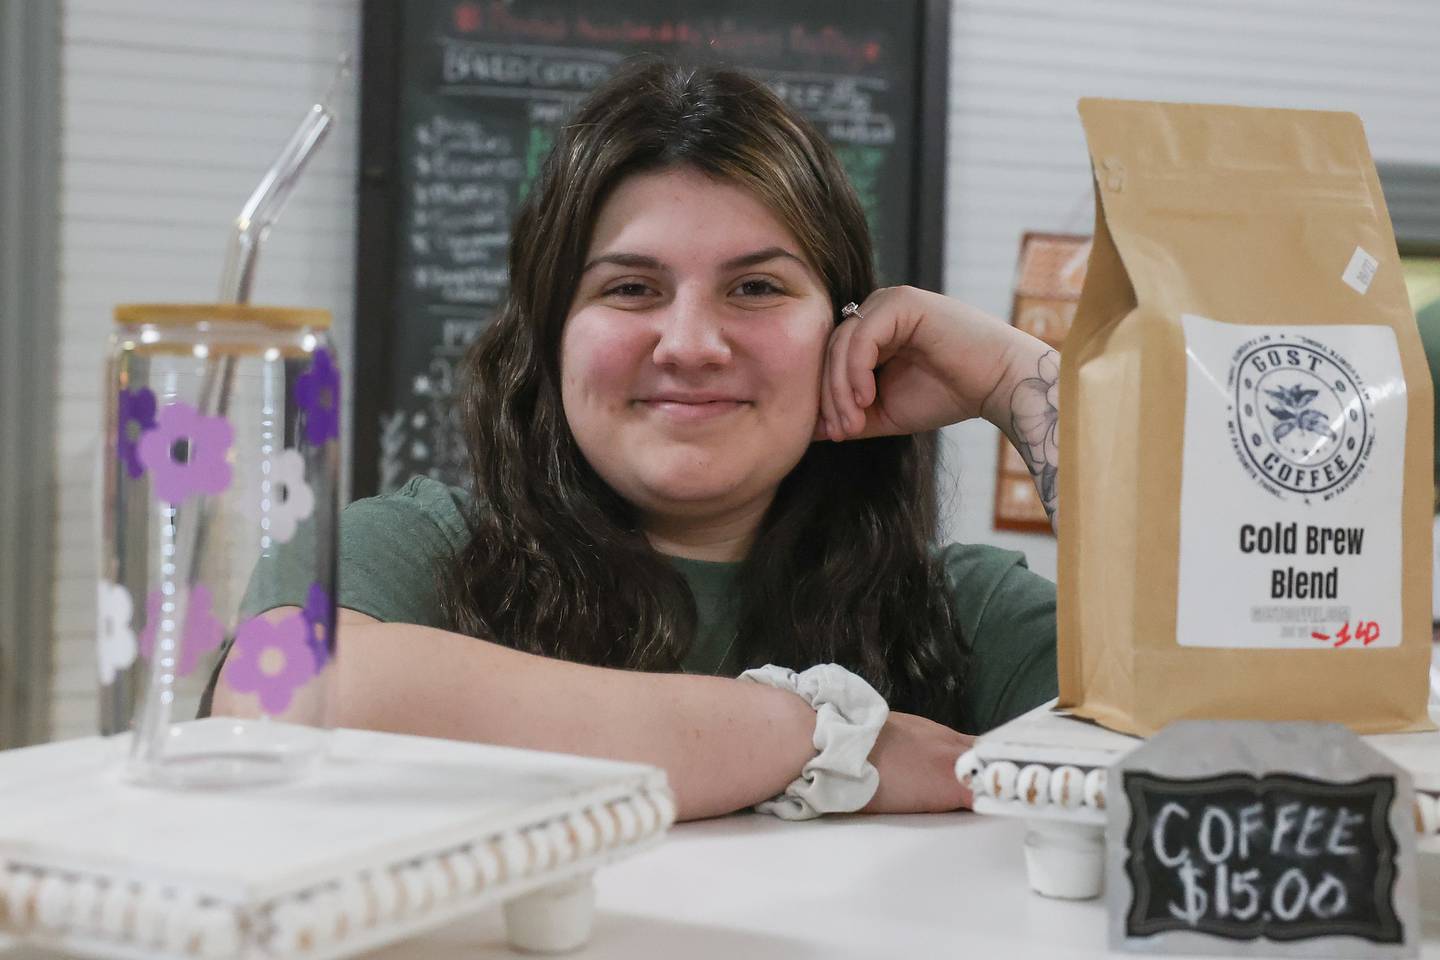 Megan DiCaro poses for a photo at her bakery Springview Sweets Bakery located at the Lockport Metra train station in downtown Lockport on Friday, Dec.15th. Megan is current in 1st place in The Greatest Baker online voting contest, presented by Cake Boss Buddy Valastro.